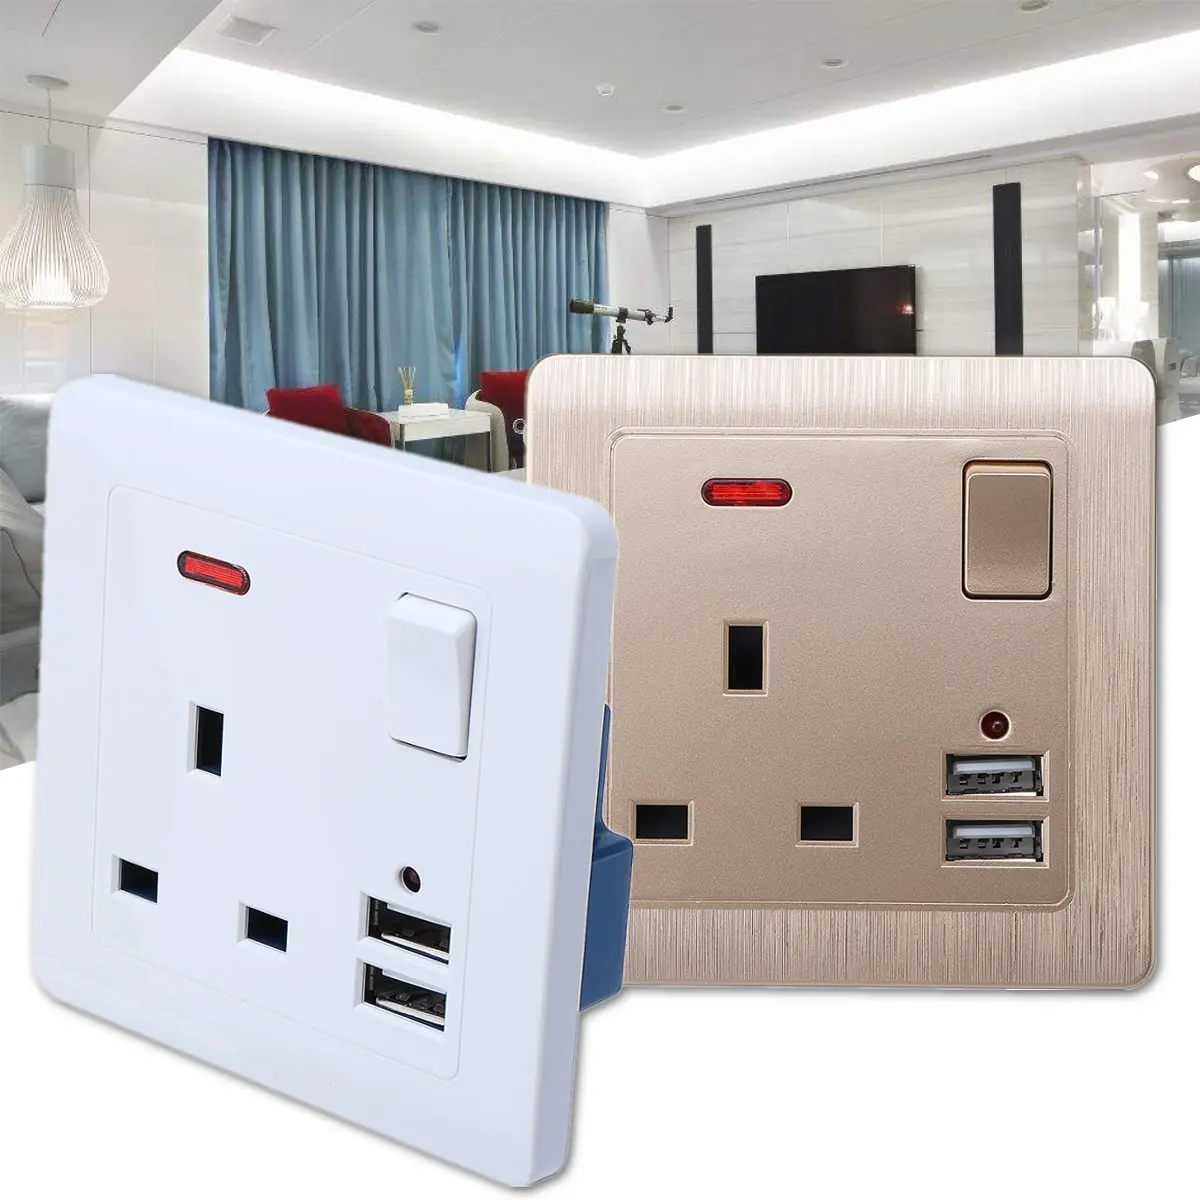 

UK Plug 13A 250V Power Socket Dual USB Wall AC DC Charger Switch Outlet Adapter Port With 2 USB Ports Electrical Sockets